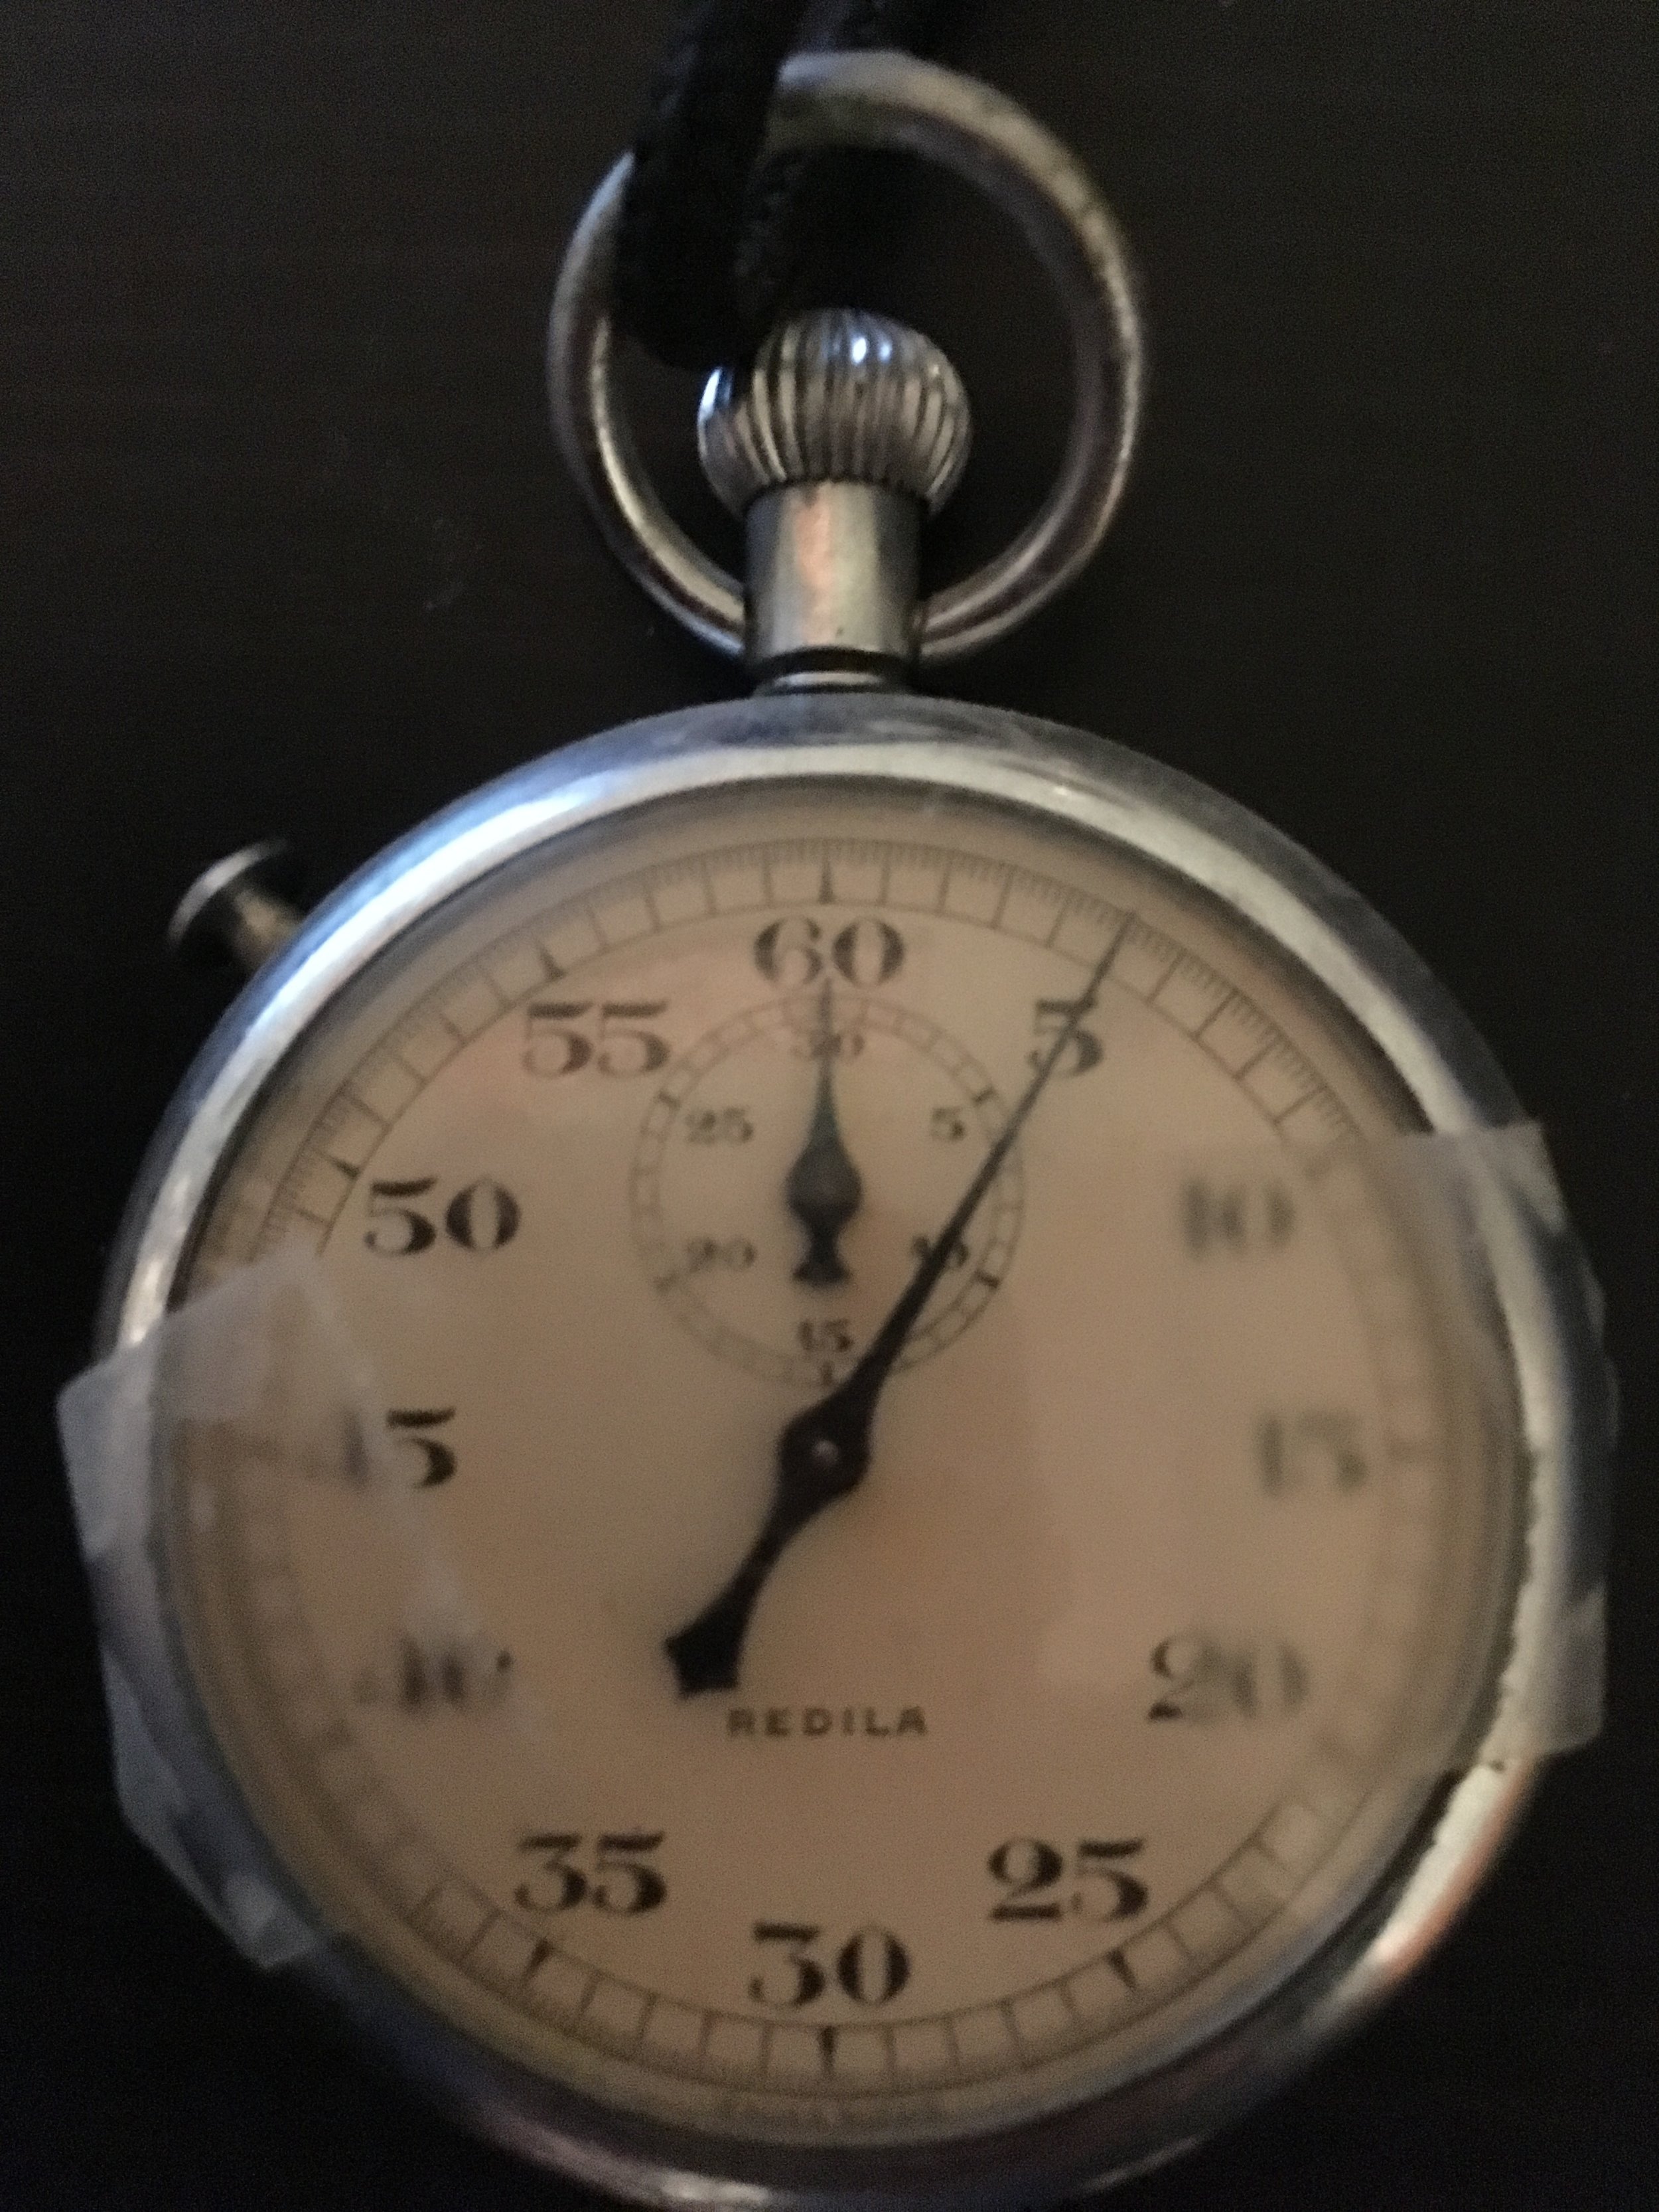 My brother Ley's 1950's stopwatch